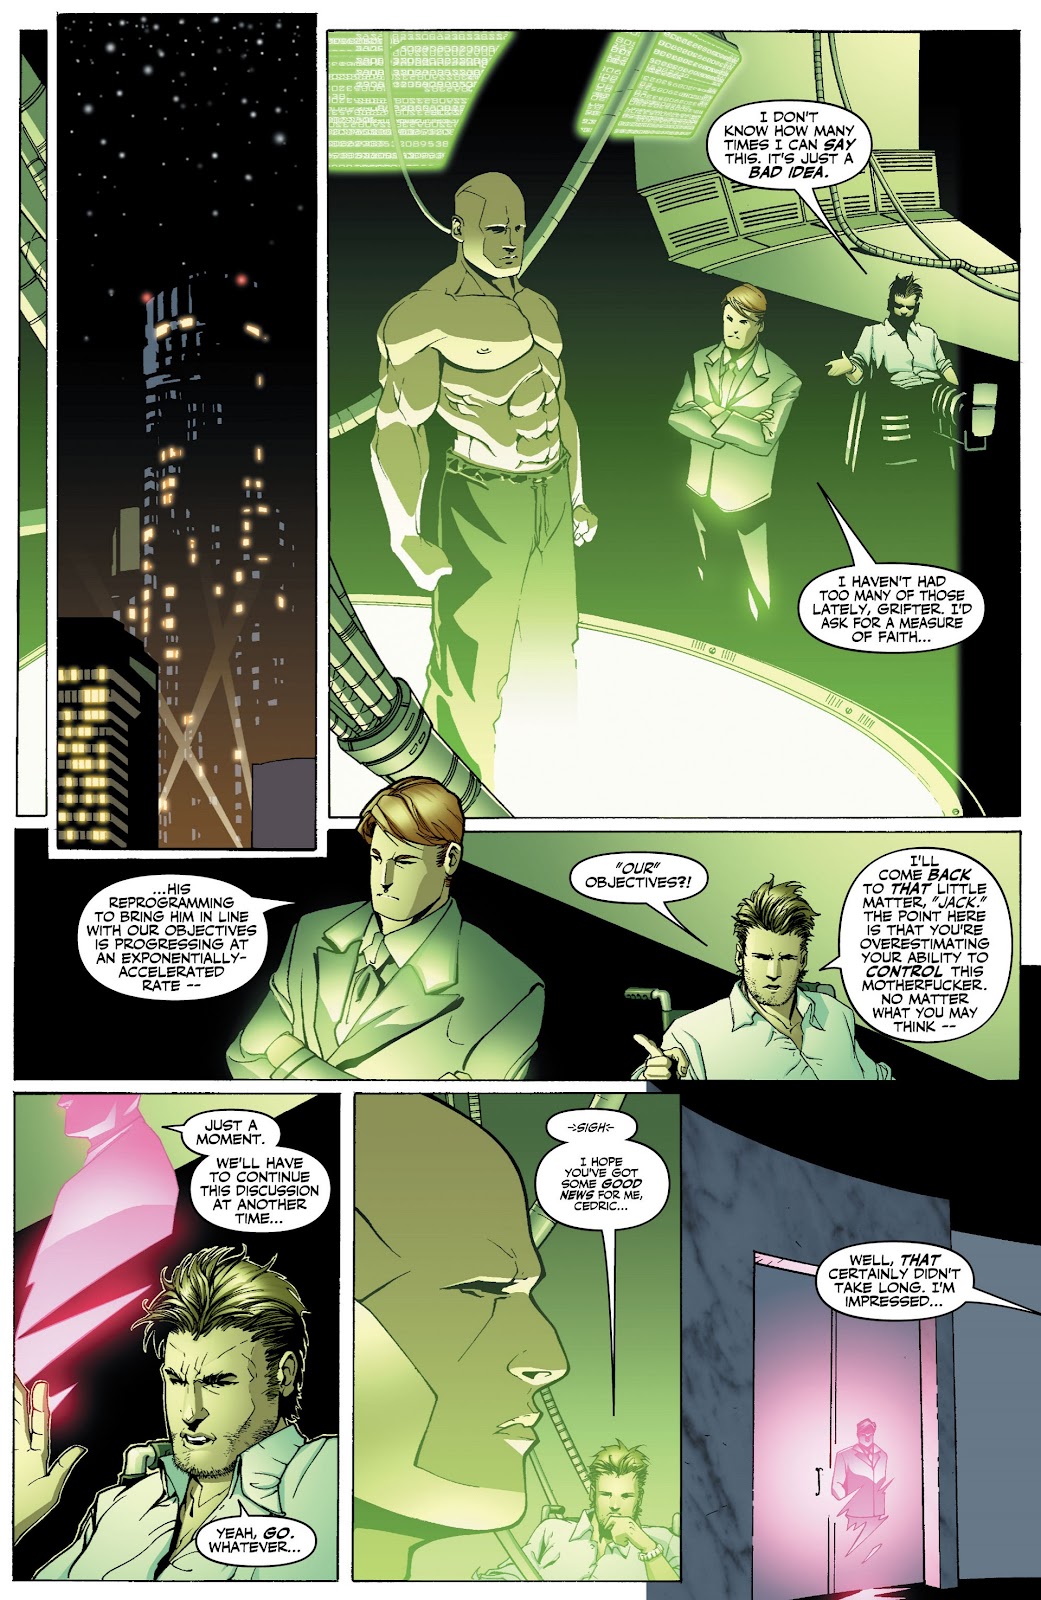 Wildcats Version 3.0 Issue #7 #7 - English 22